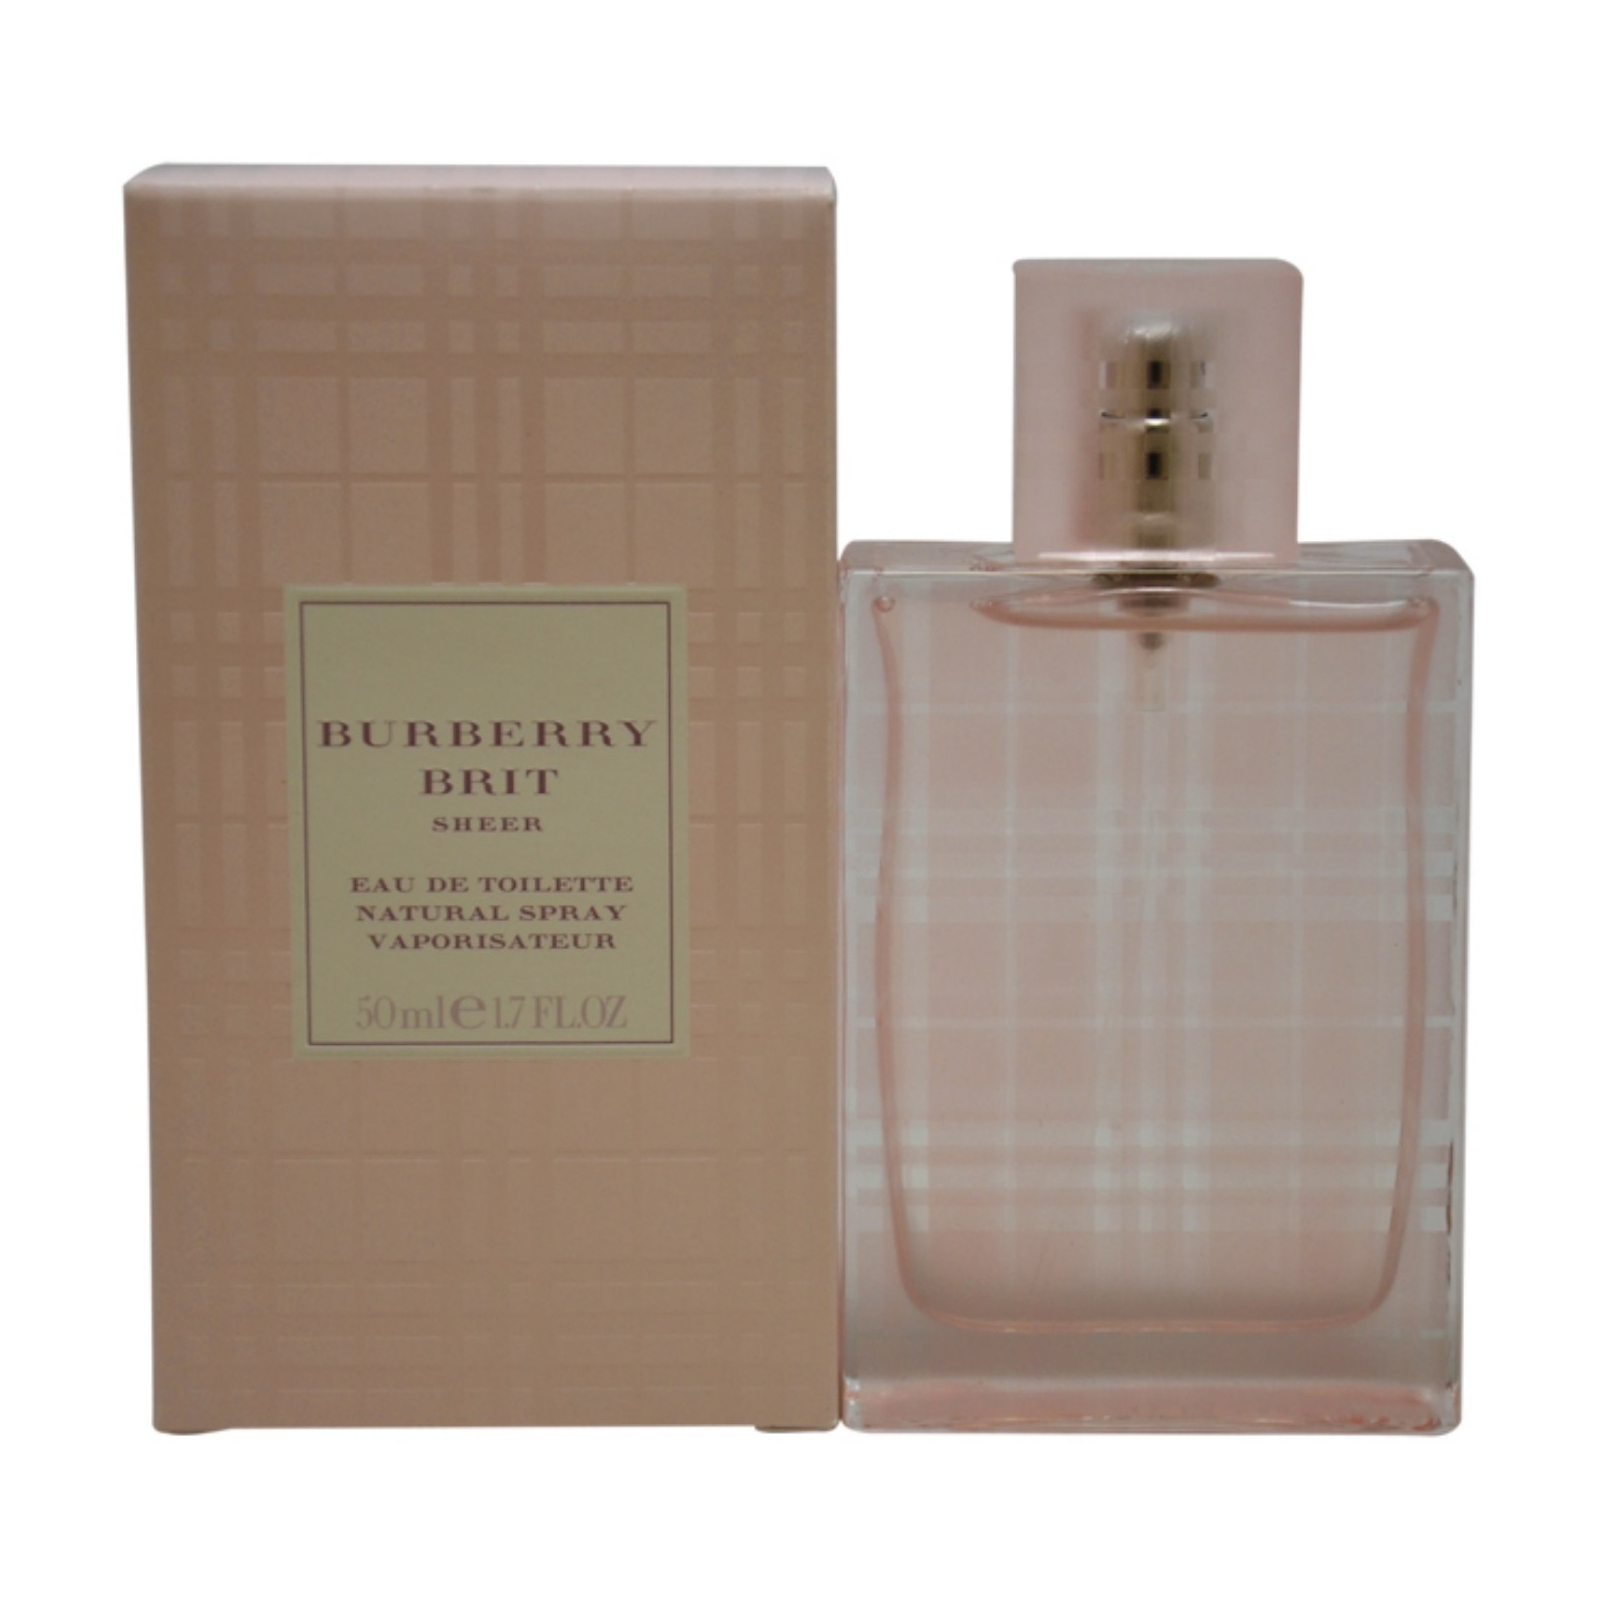 Burberry Brit Sheer by  for Women - 1.7 oz EDT Spray